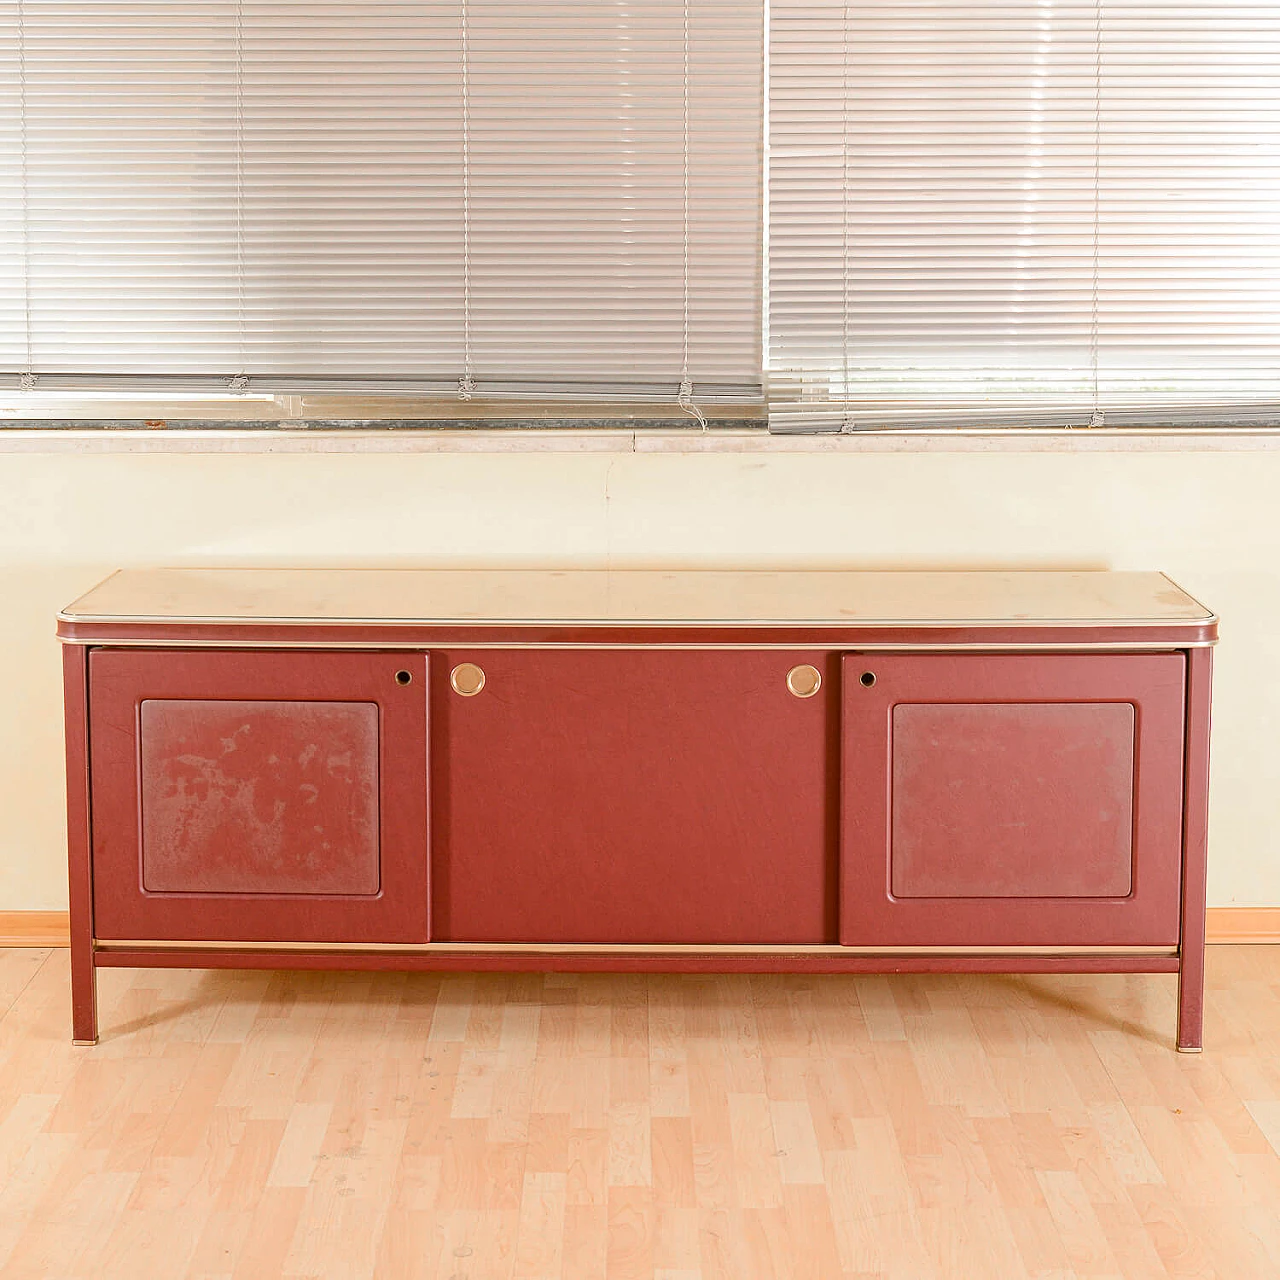 Burgundy leatherette, glass and metal sideboard by Umberto Mascagni 1